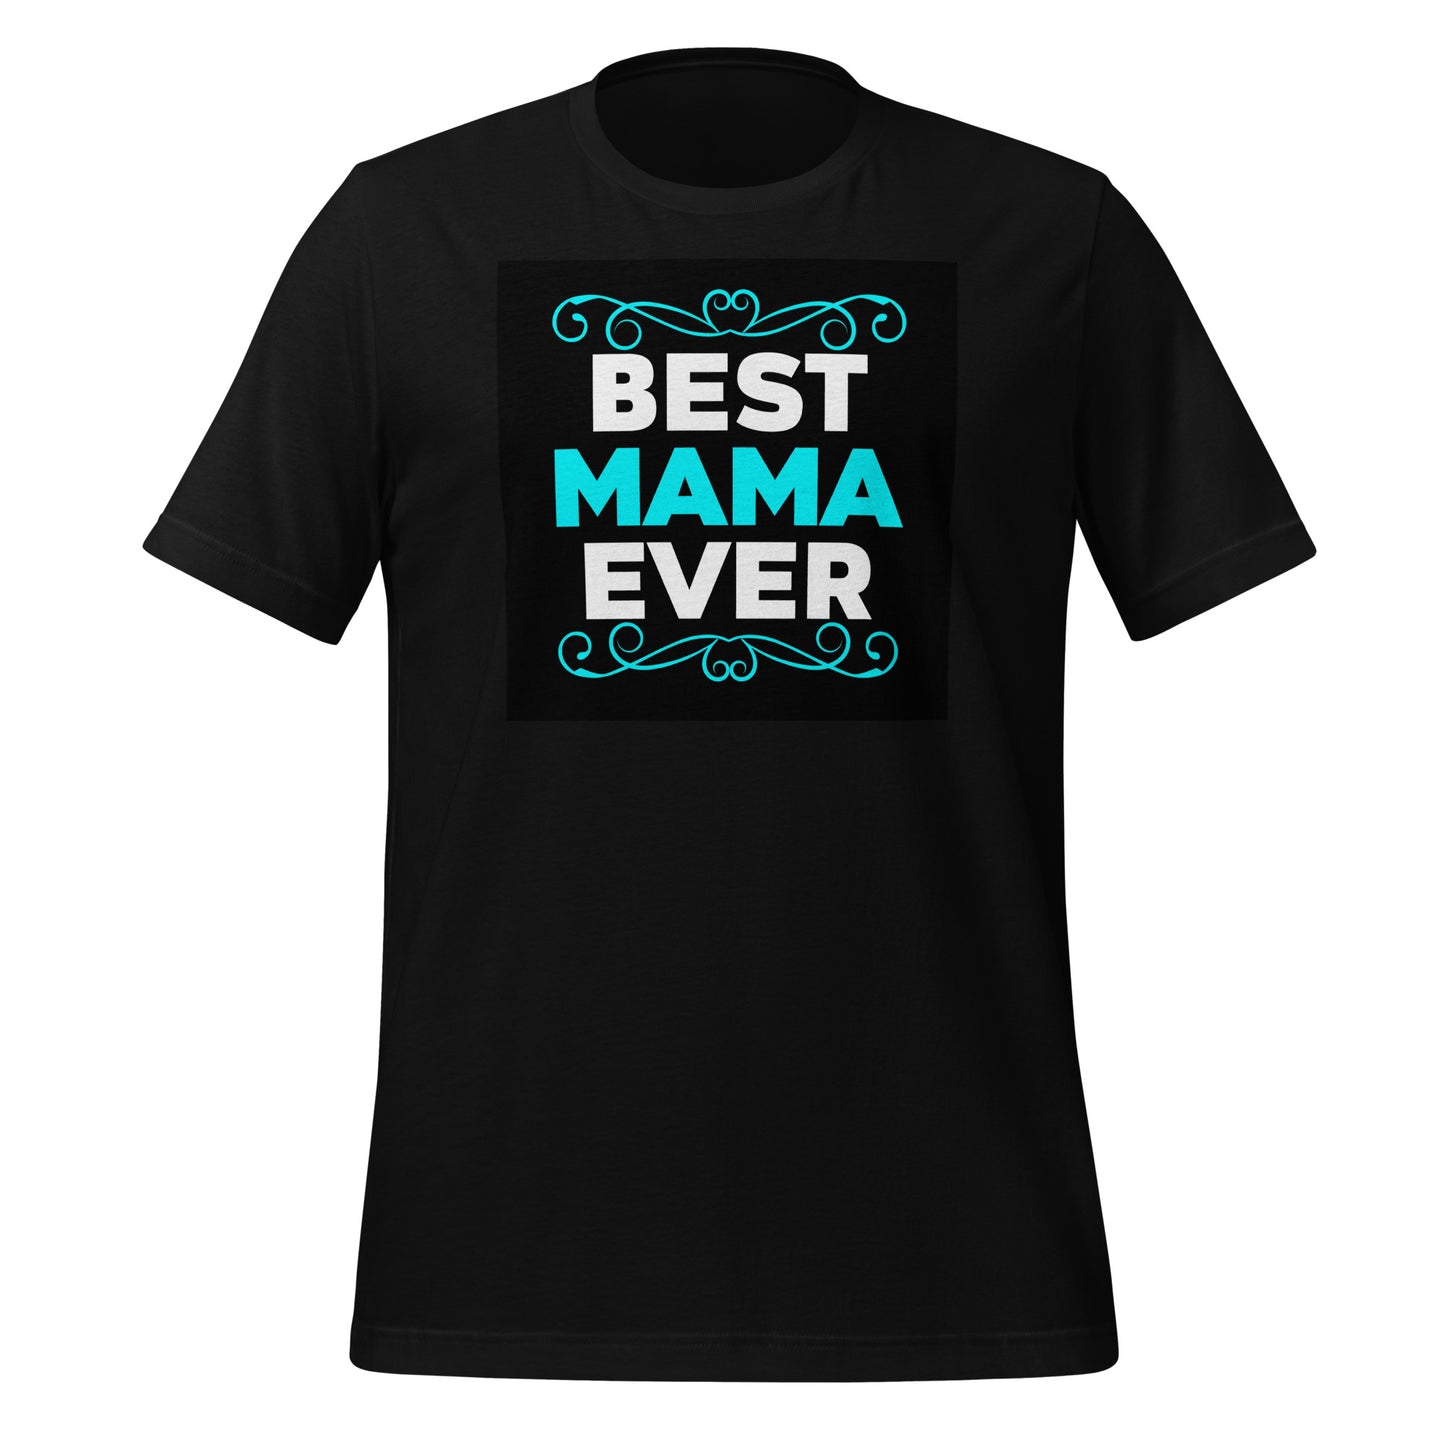 Best Mama Ever T-shirt: Show Your Love